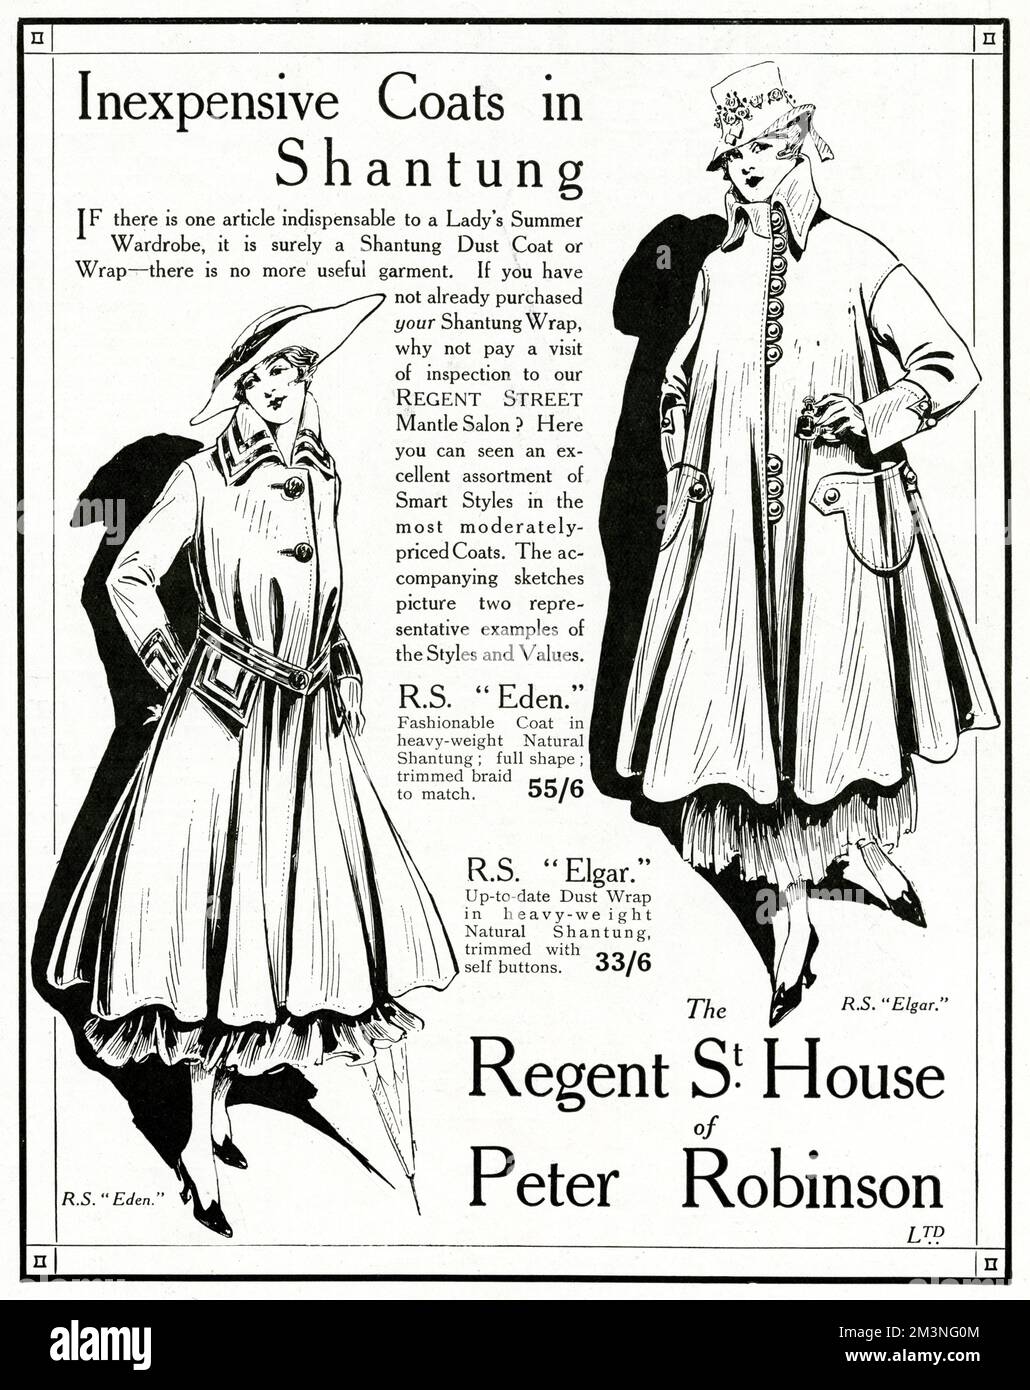 'Inexpensive coats in shantung'  If there is one artical indispensable to a lady's summer wardrode, it is surely a shantung dust coat or wrap - there is no more useful garment.       Date: 1916 Stock Photo